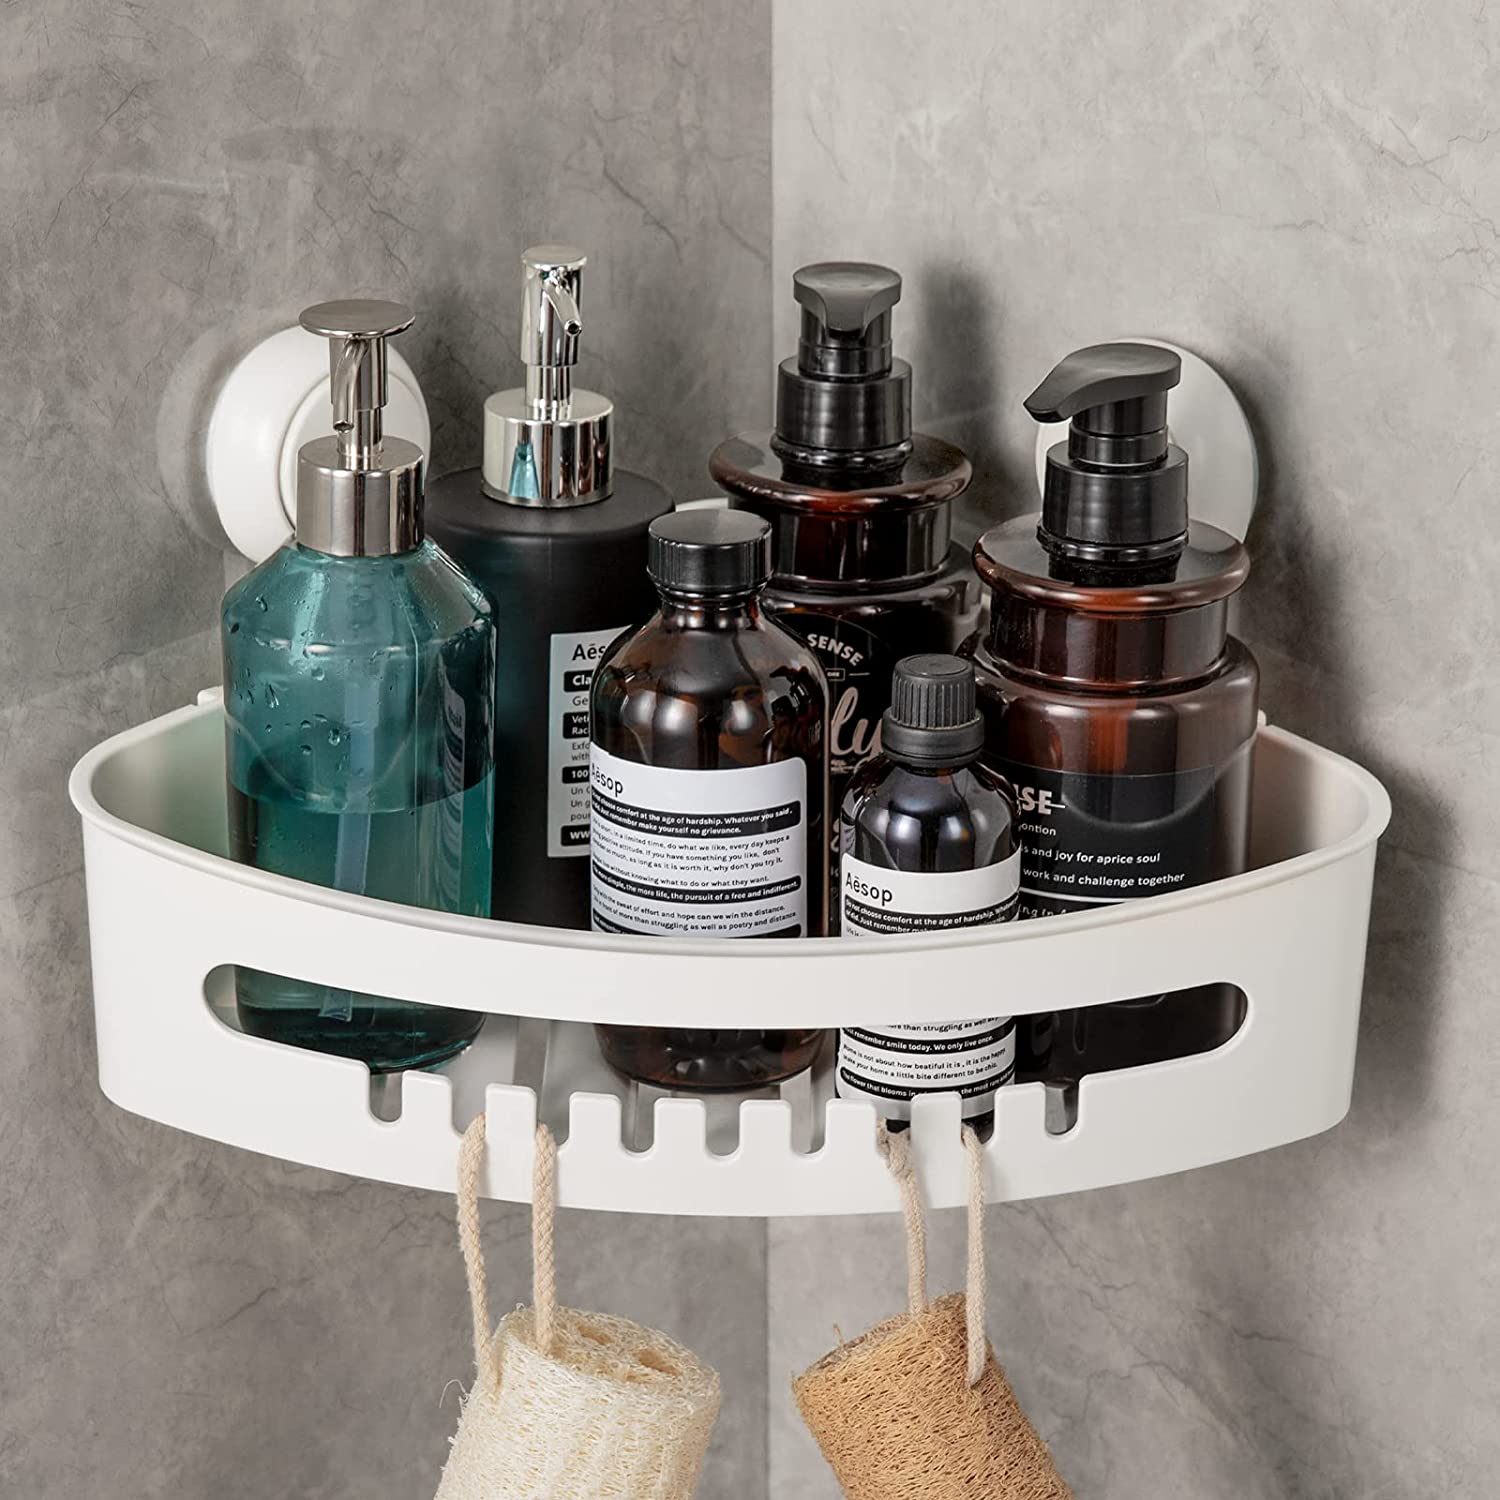 LEVERLOC Corner Shower Caddy Suction Cup NO-Drilling Removable